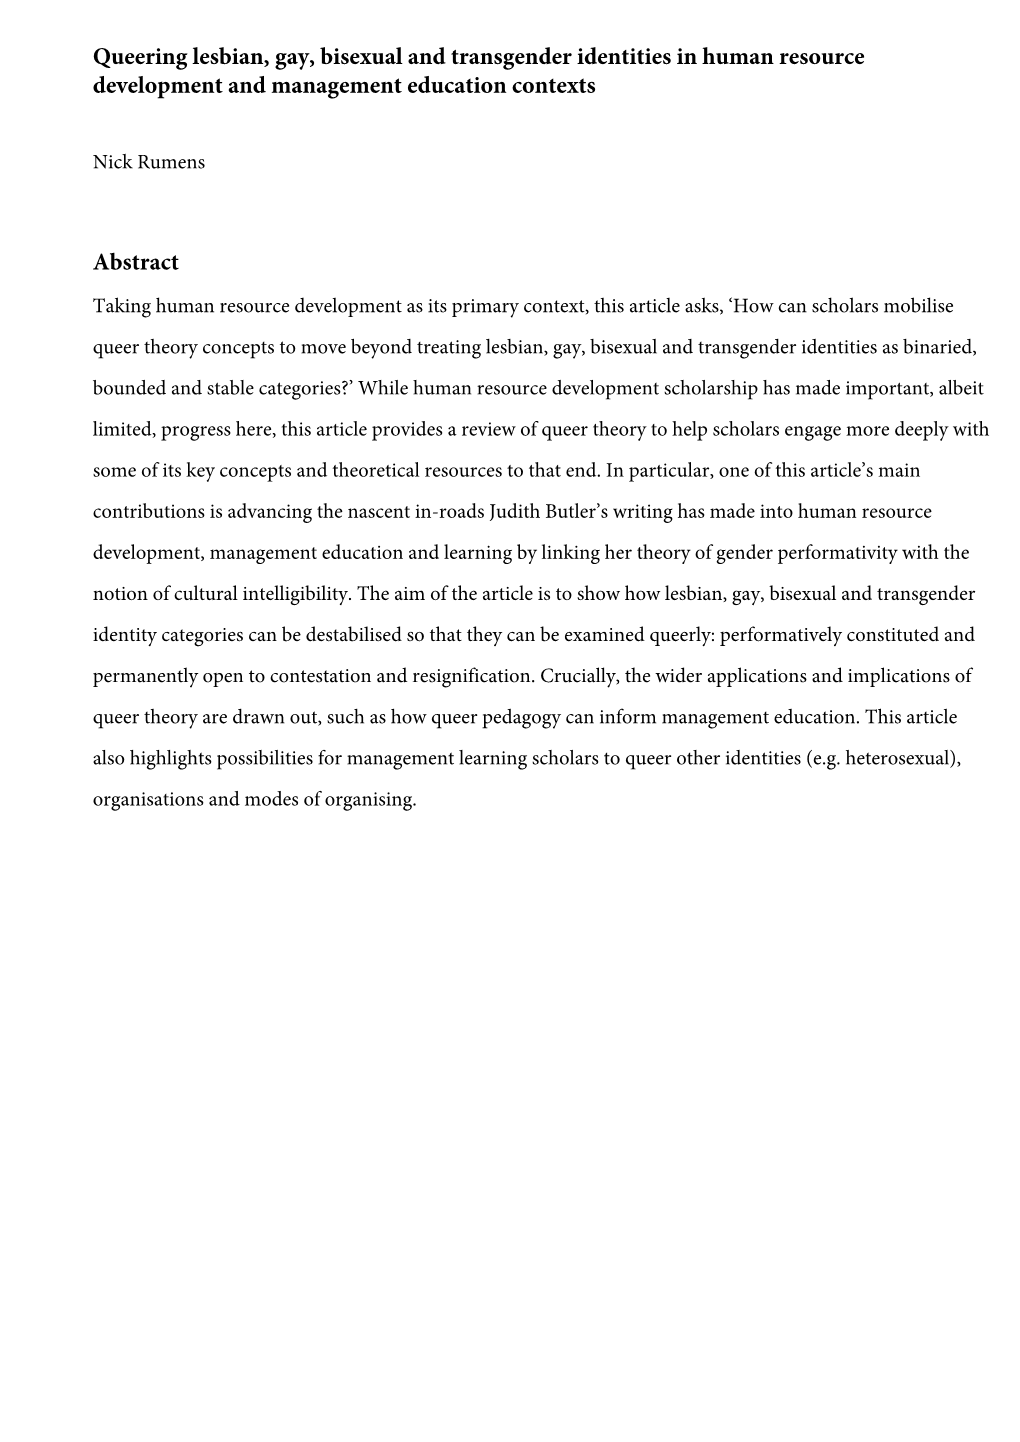 Queering Lesbian, Gay, Bisexual and Transgender Identities in Human Resource Development and Management Education Contexts